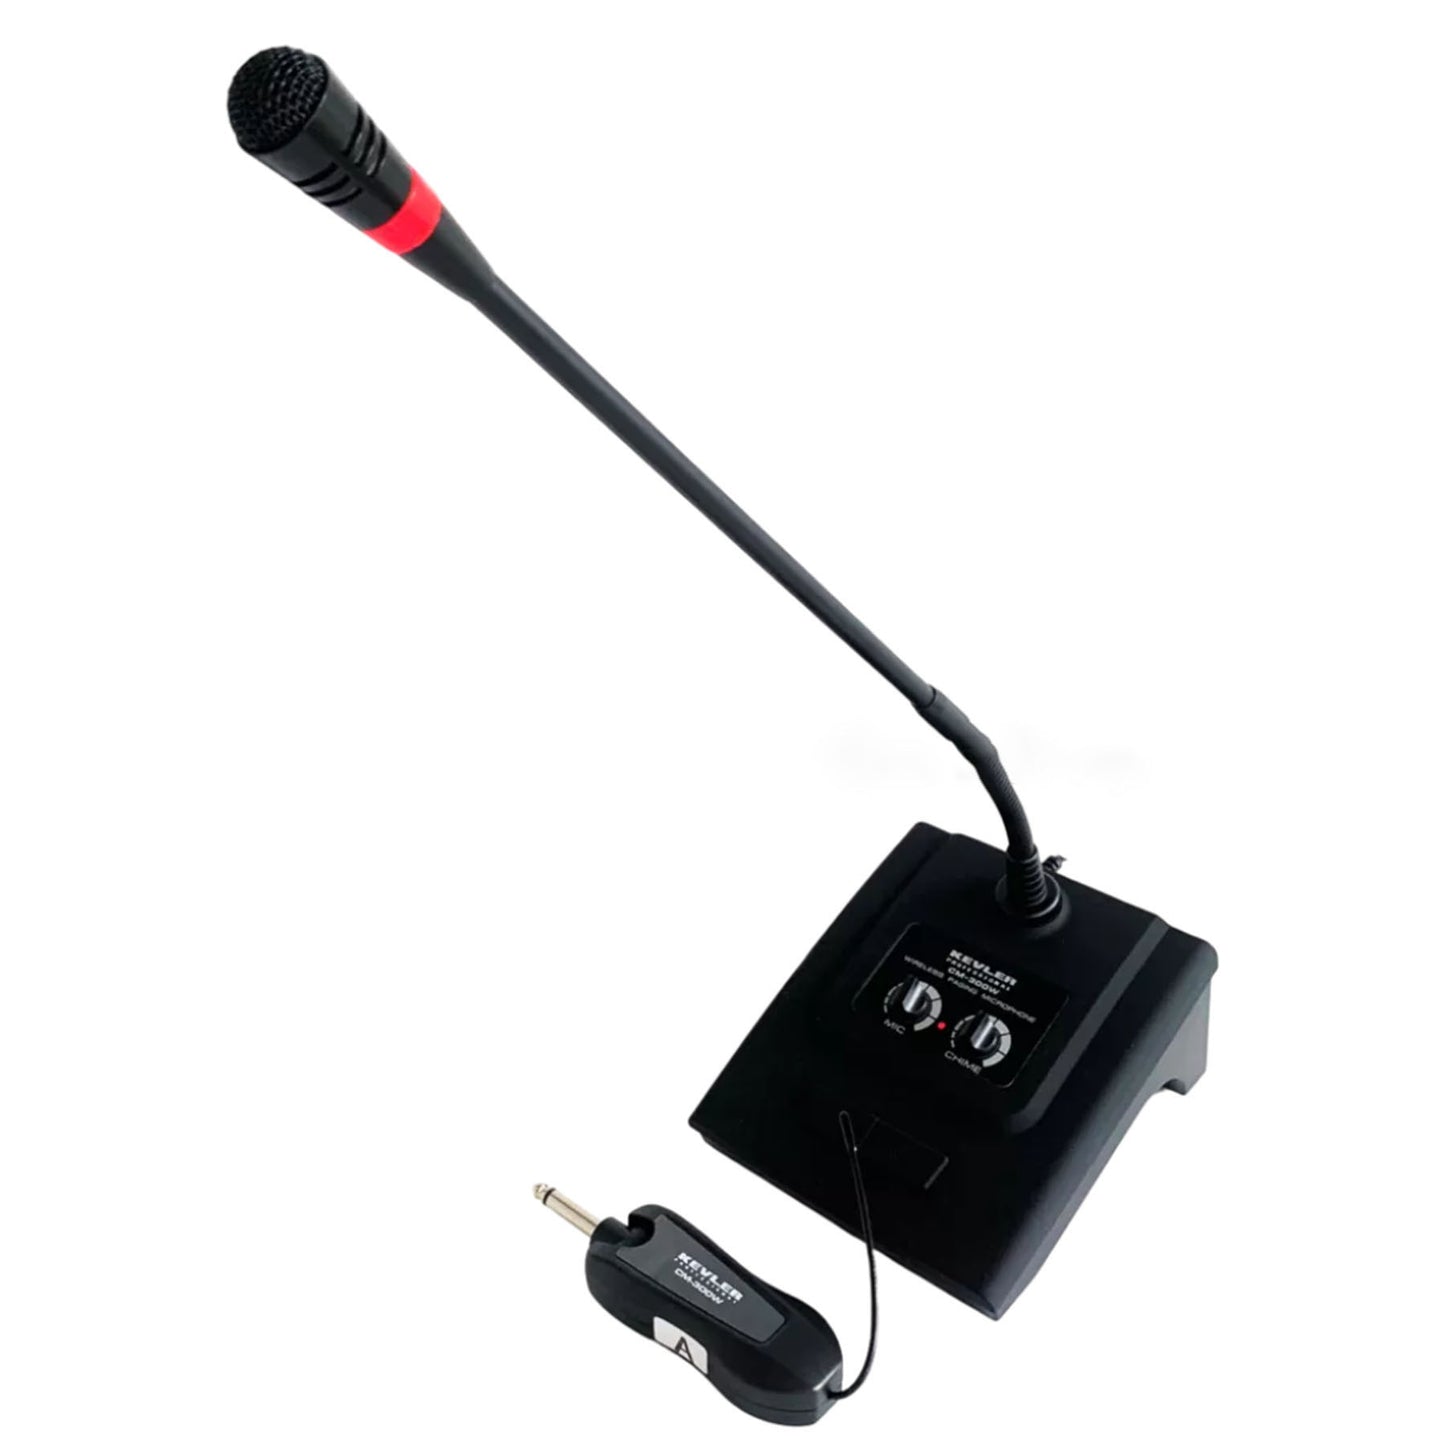 KEVLER CM-300W Supercardioid Condenser Conference Wireless Gooseneck Microphone with Receiver, Volume Control, AUX Input and Record and Chime Function for Paging, Meetings and Public Speaking